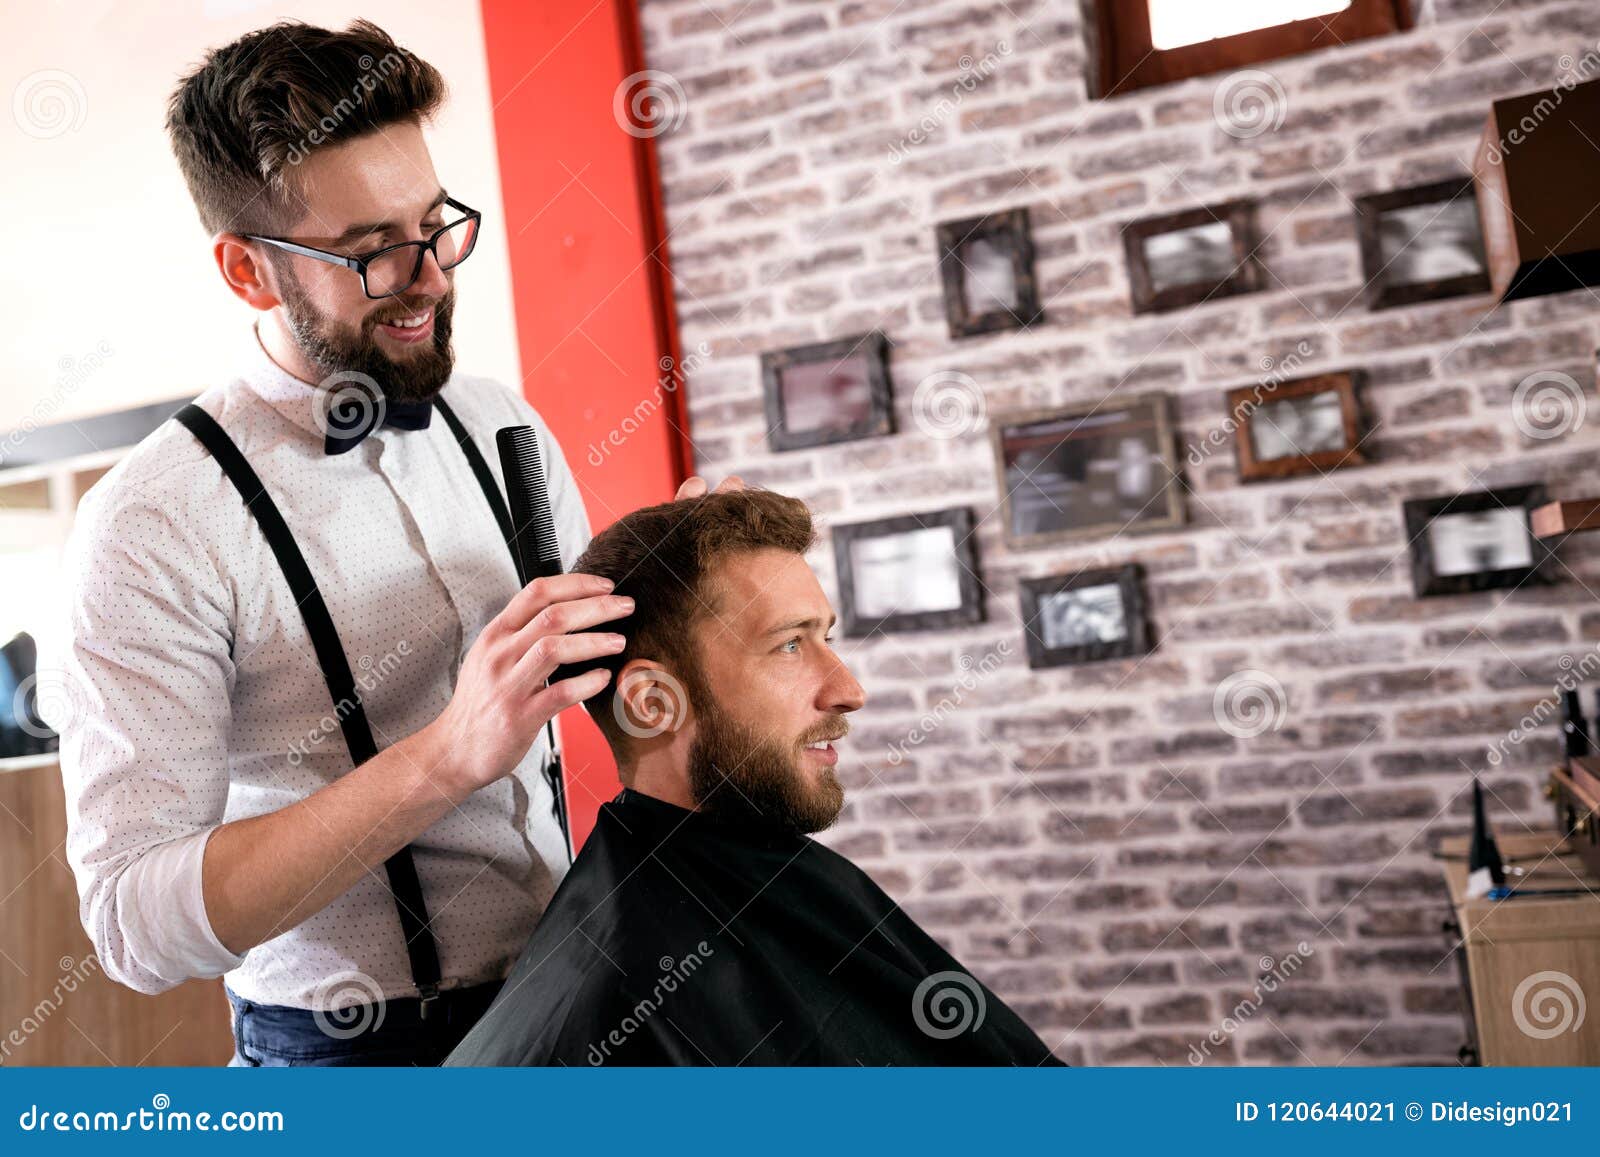 hairdresser adjusts hair a customer with a comb